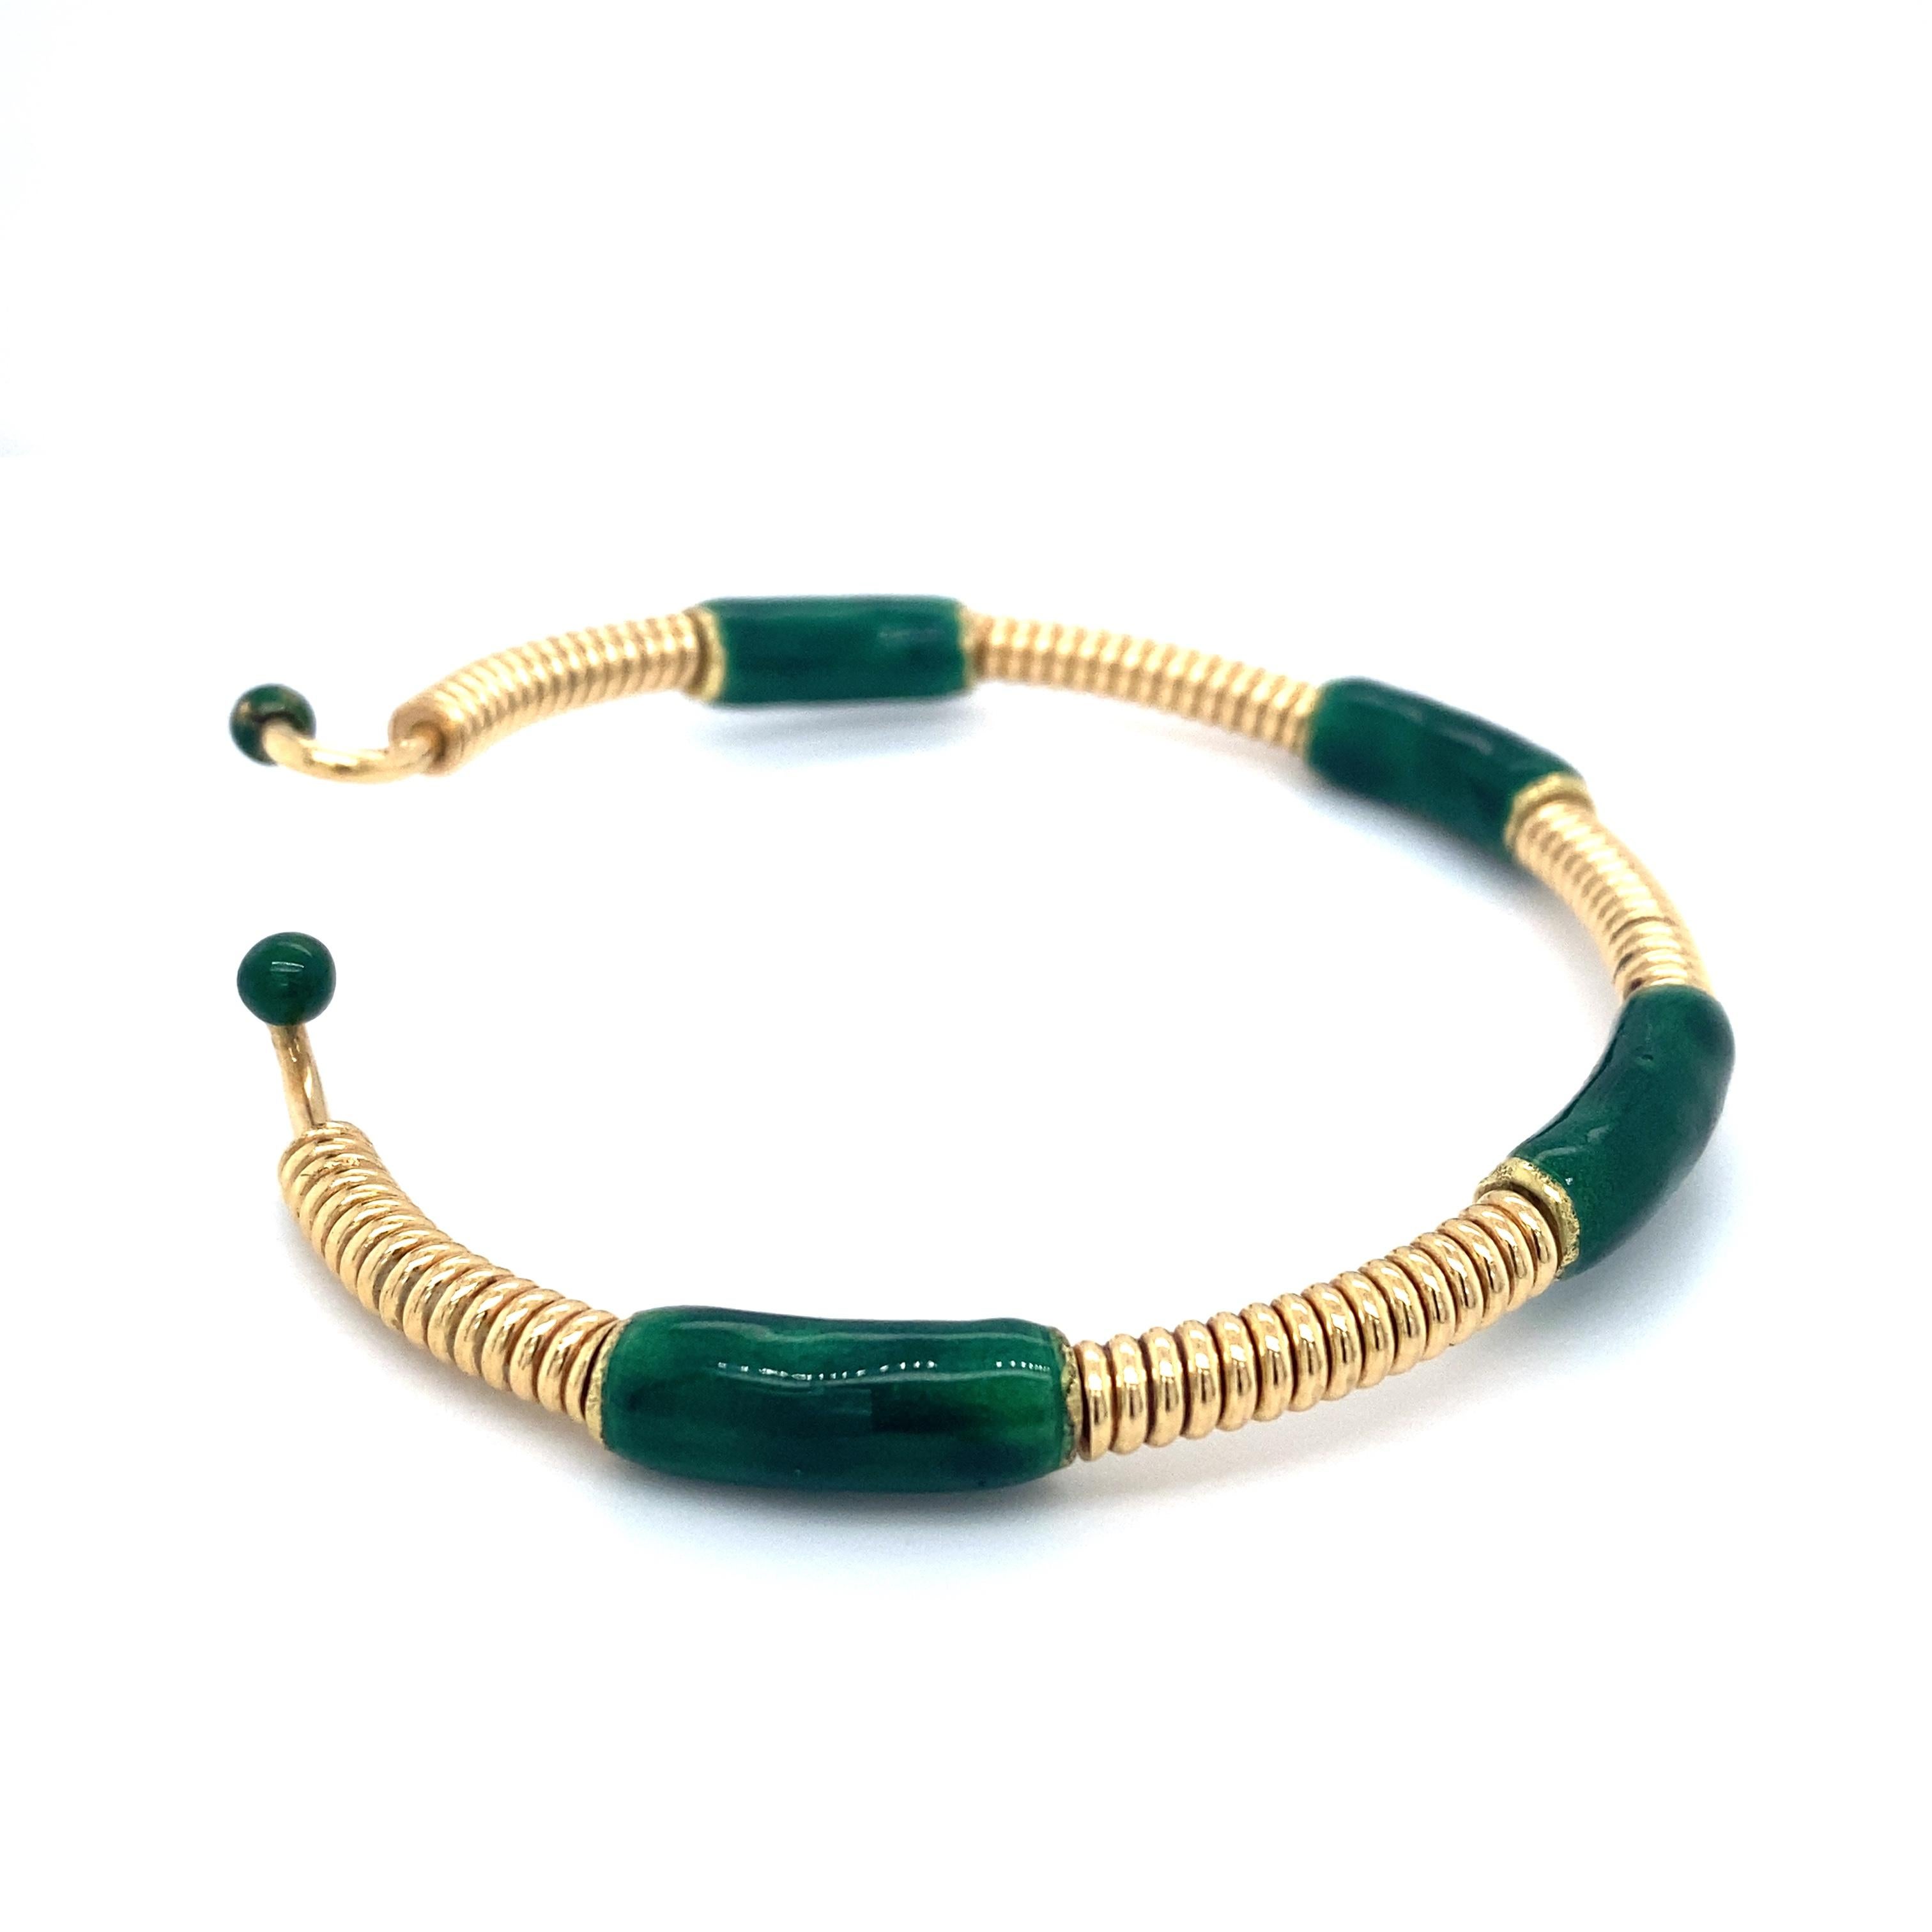 Item Details: This bracelet by GUCCI is stamped with the maker's mark and features a coiled gold and enamel design.

Circa: 1980s
Metal Type: 18 Karat Yellow Gold
Weight: 31.3 grams